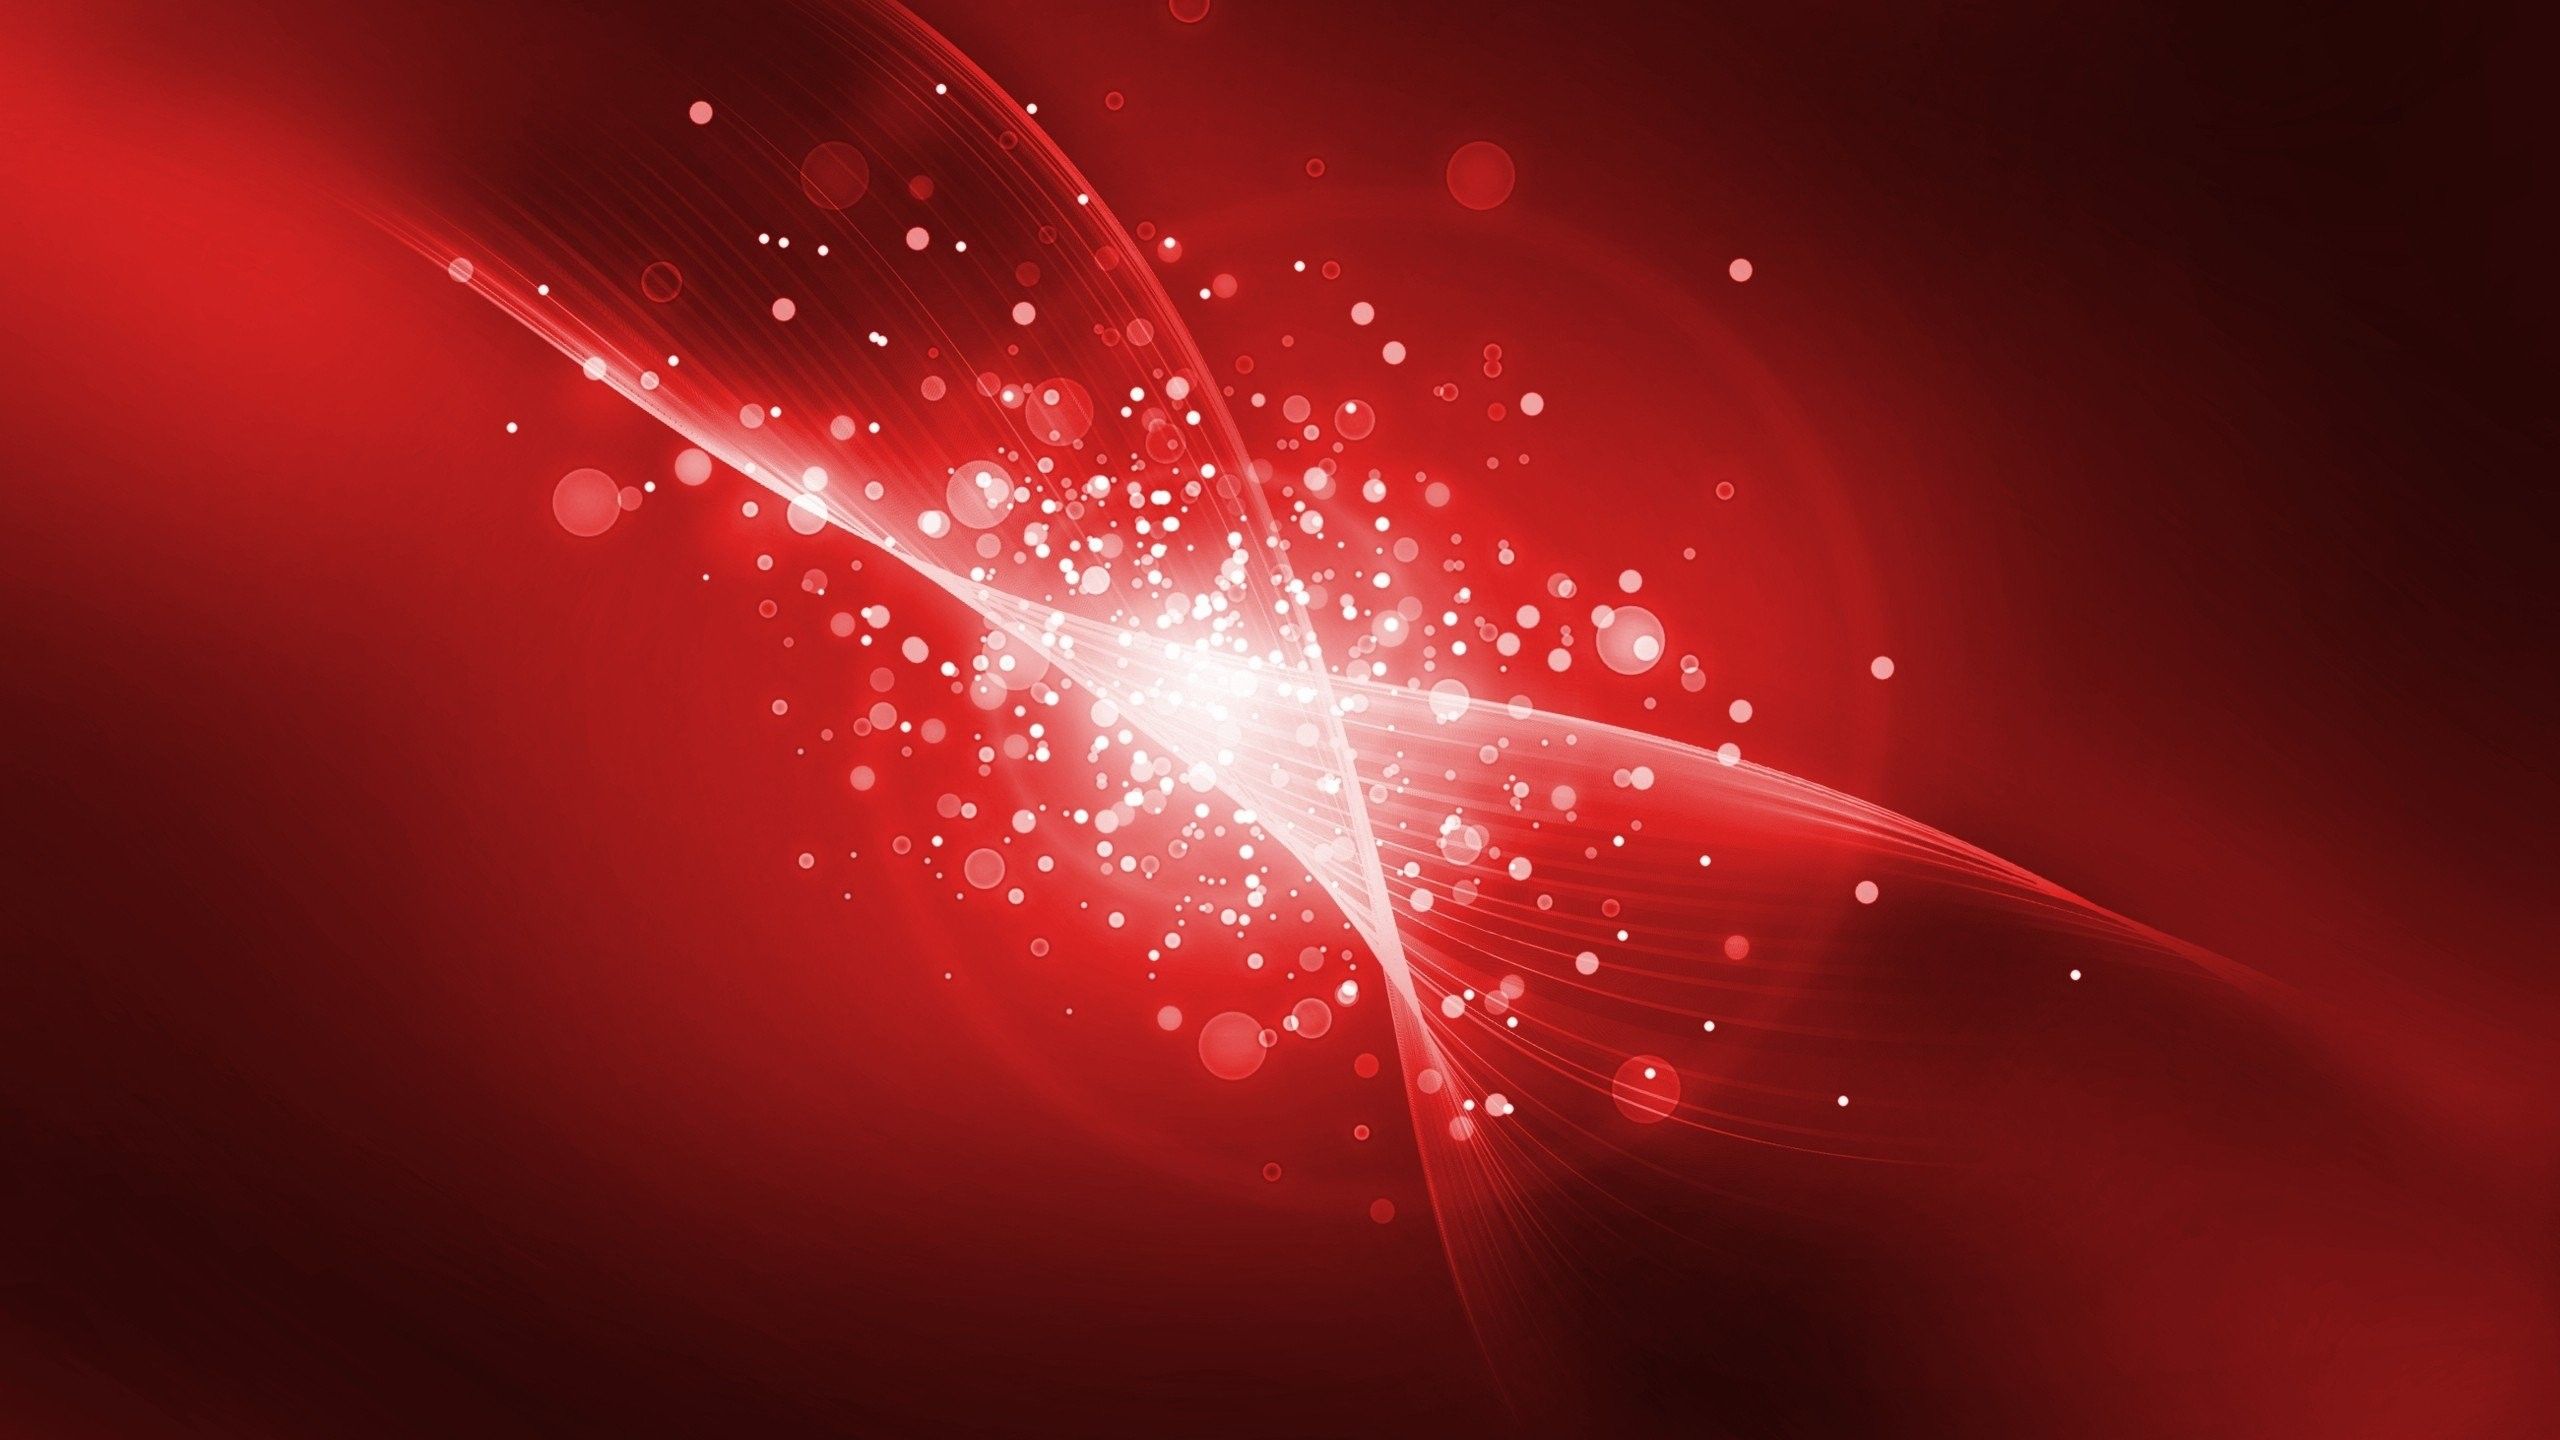 Bright Red Background Hd Picture Big Picture Background Image Download Wallpaper  Backgrounds  PSD Free Download  Pikbest